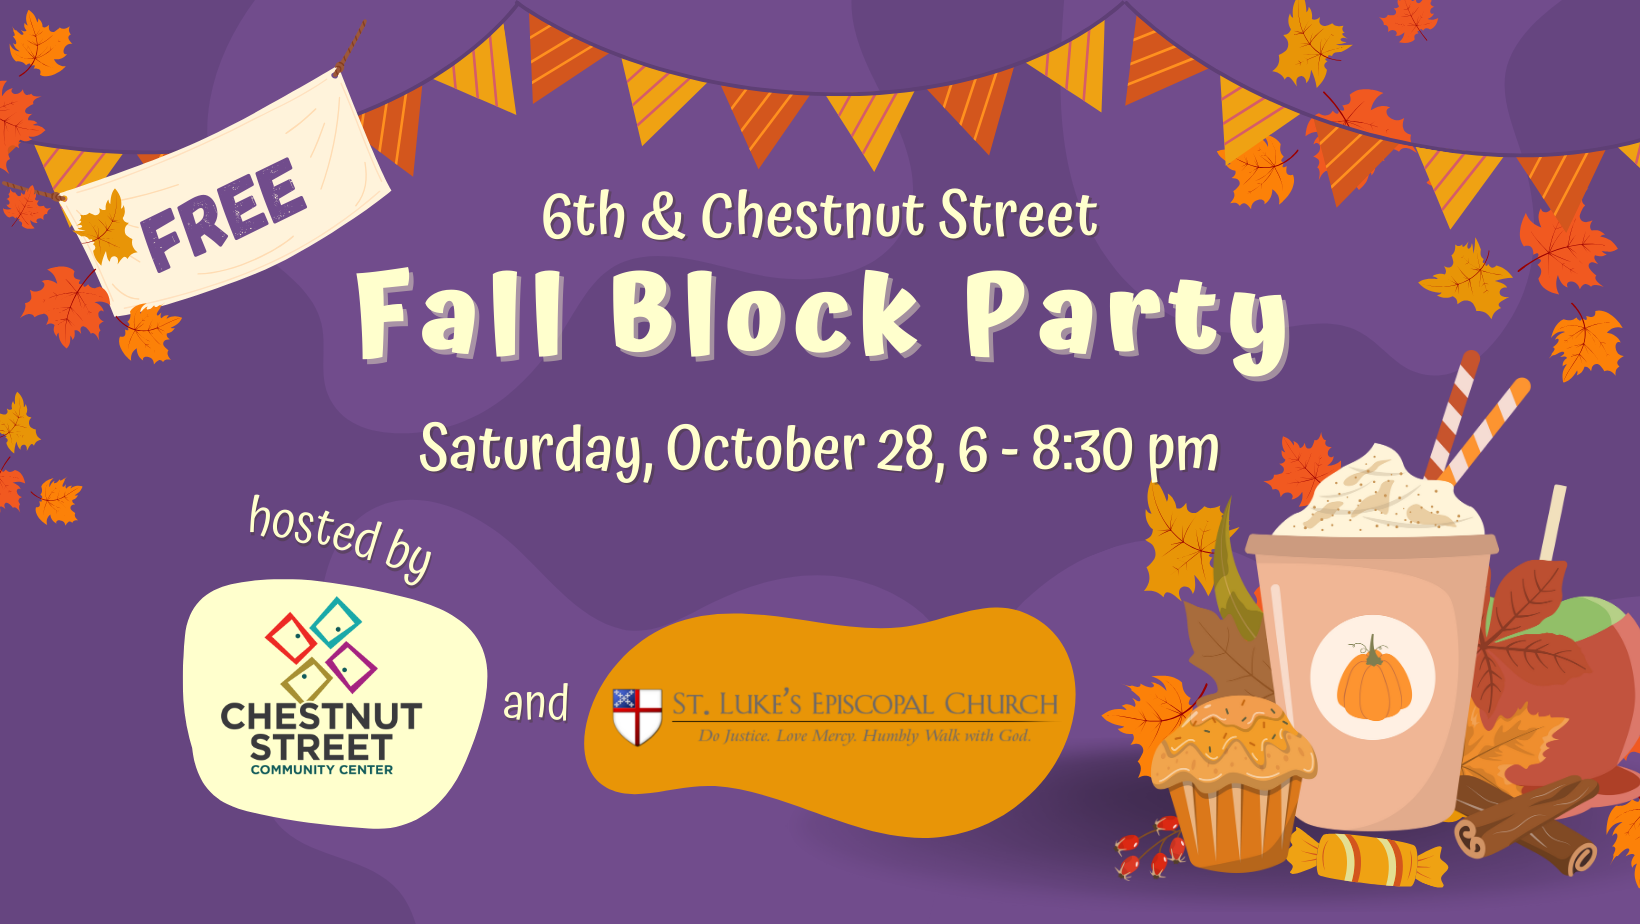 free fall block party at 6th and Chestnut Streets. October 38 6-8:30 pm. hosted by Chestnut Street Community Center and St. Luke's Church